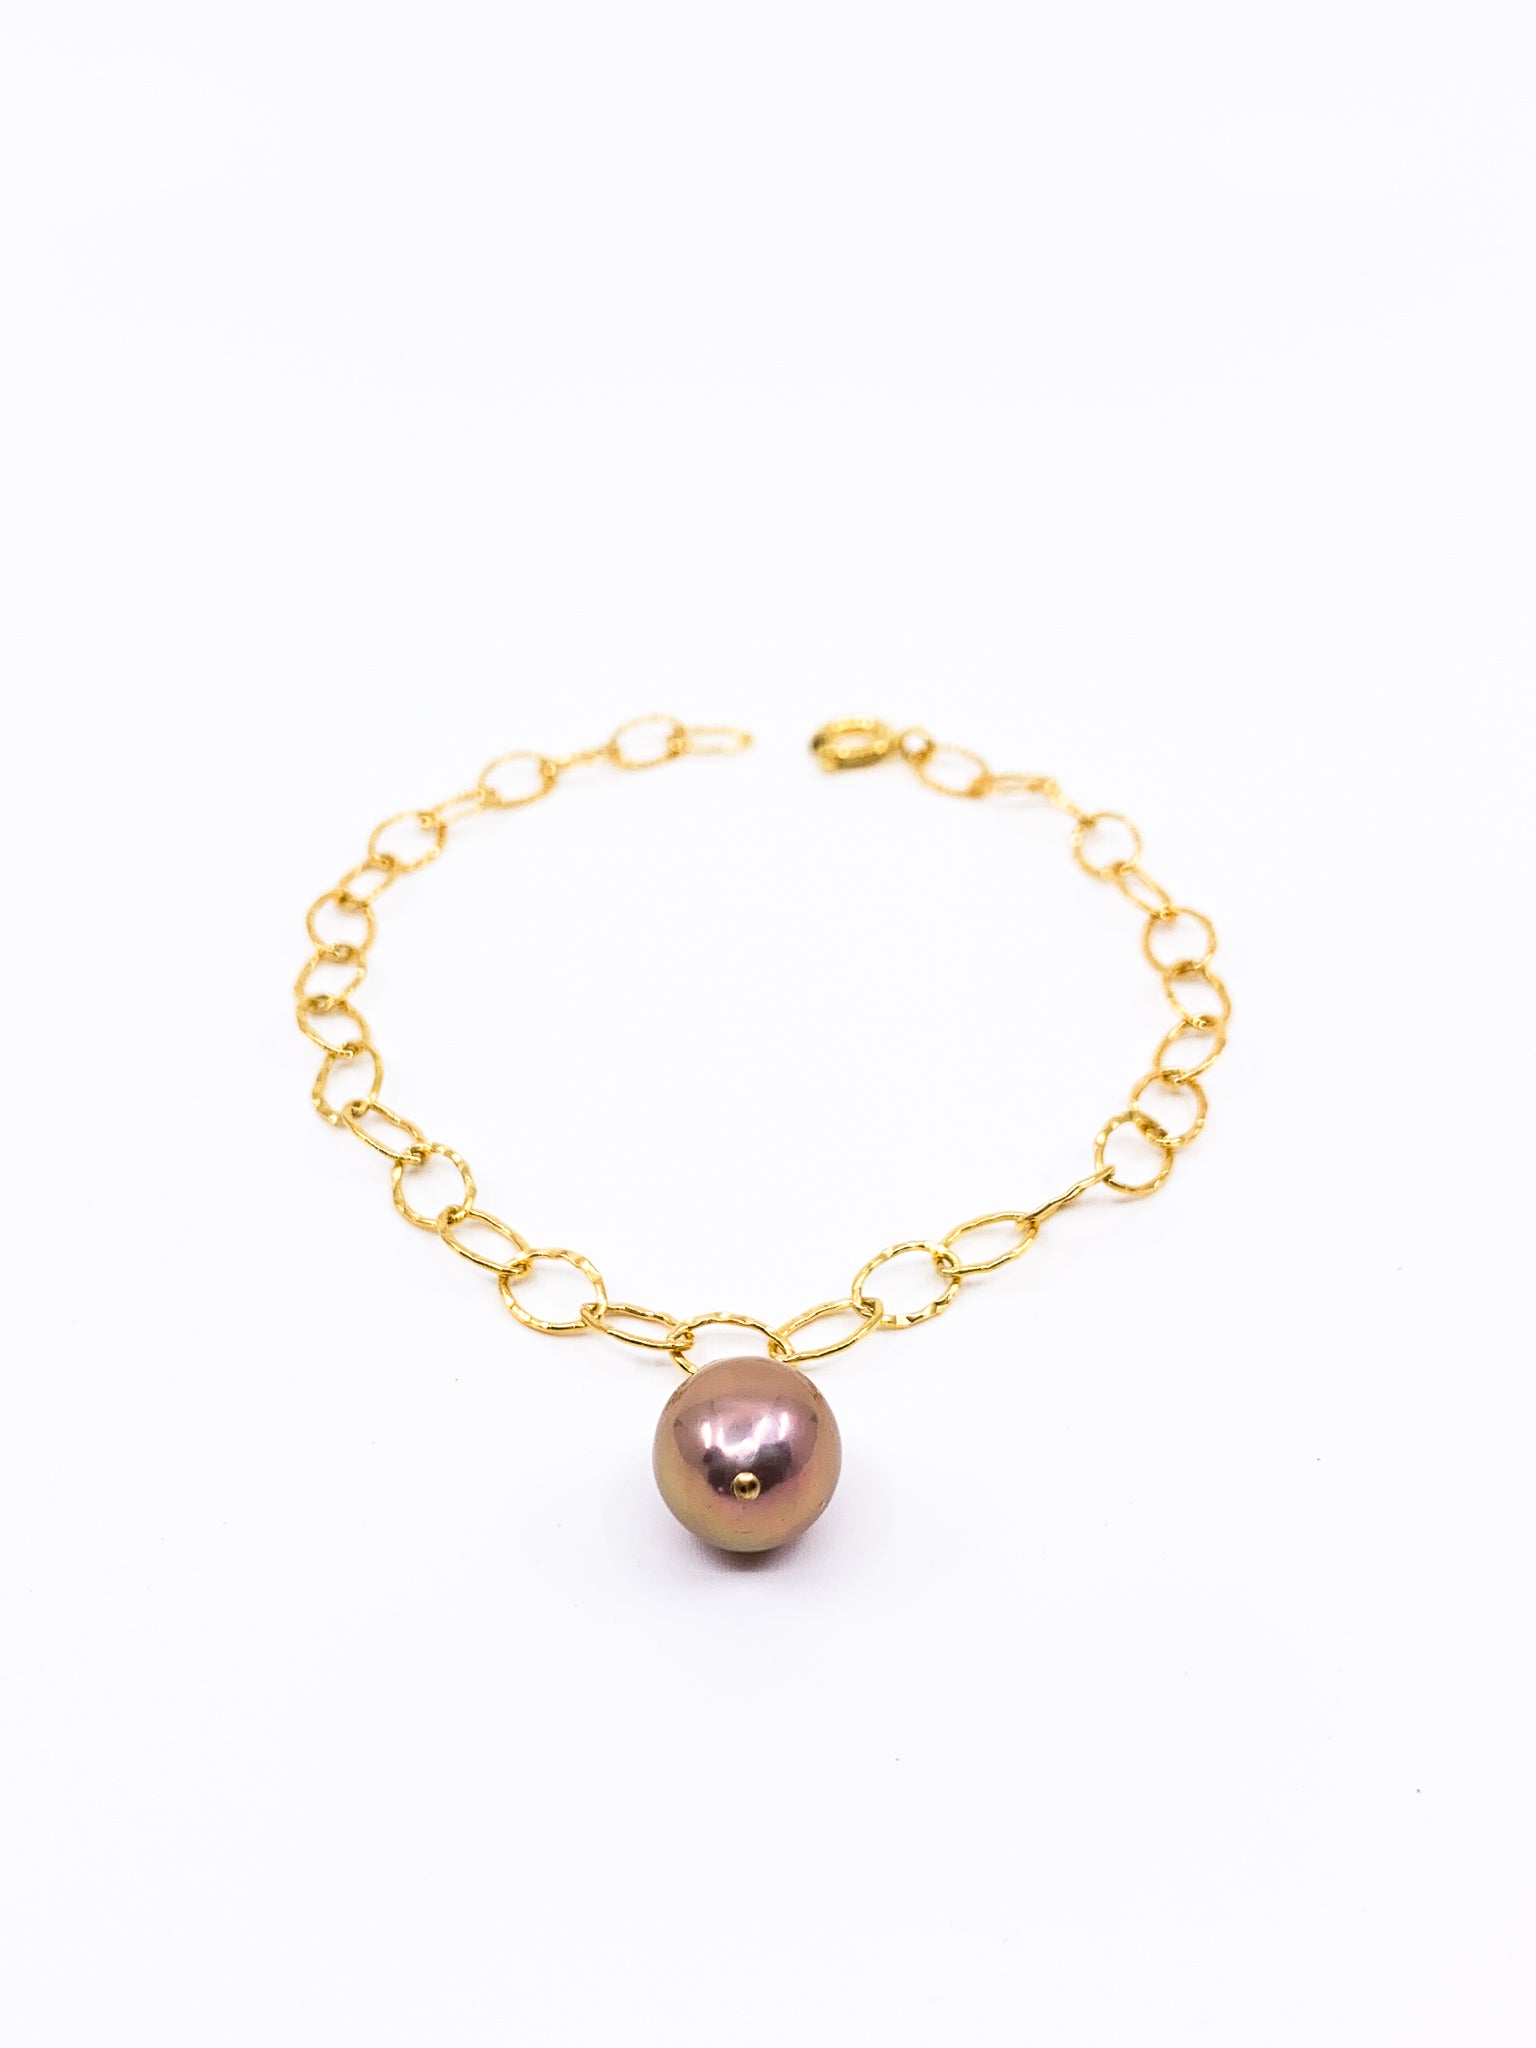 rose gold pearl gold chain charm bracelet by eve black jewelry made in Hawaii